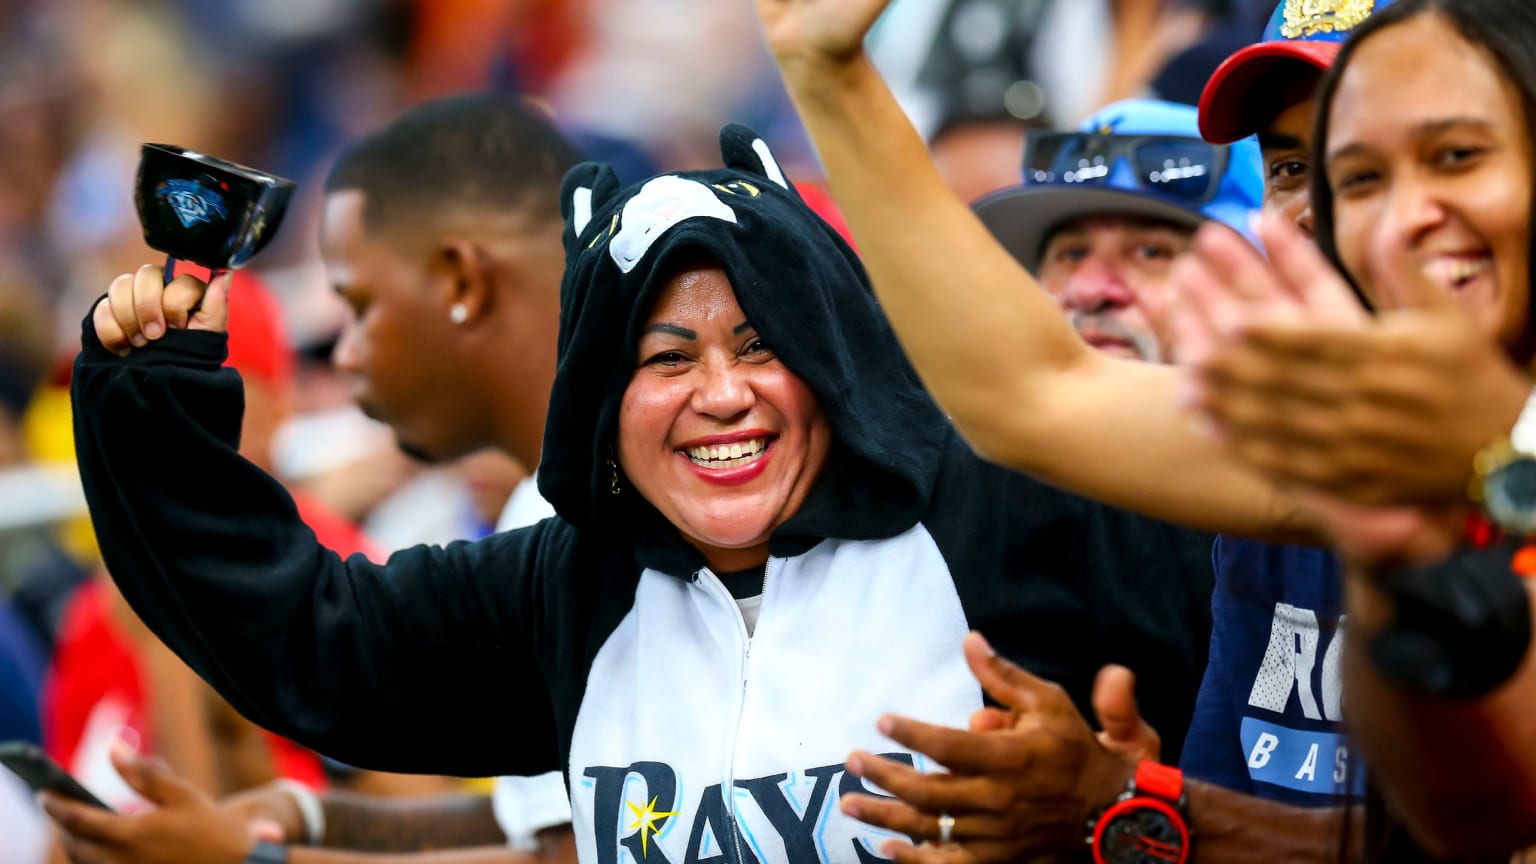 Rays offering 'season memberships' rather than traditional plans